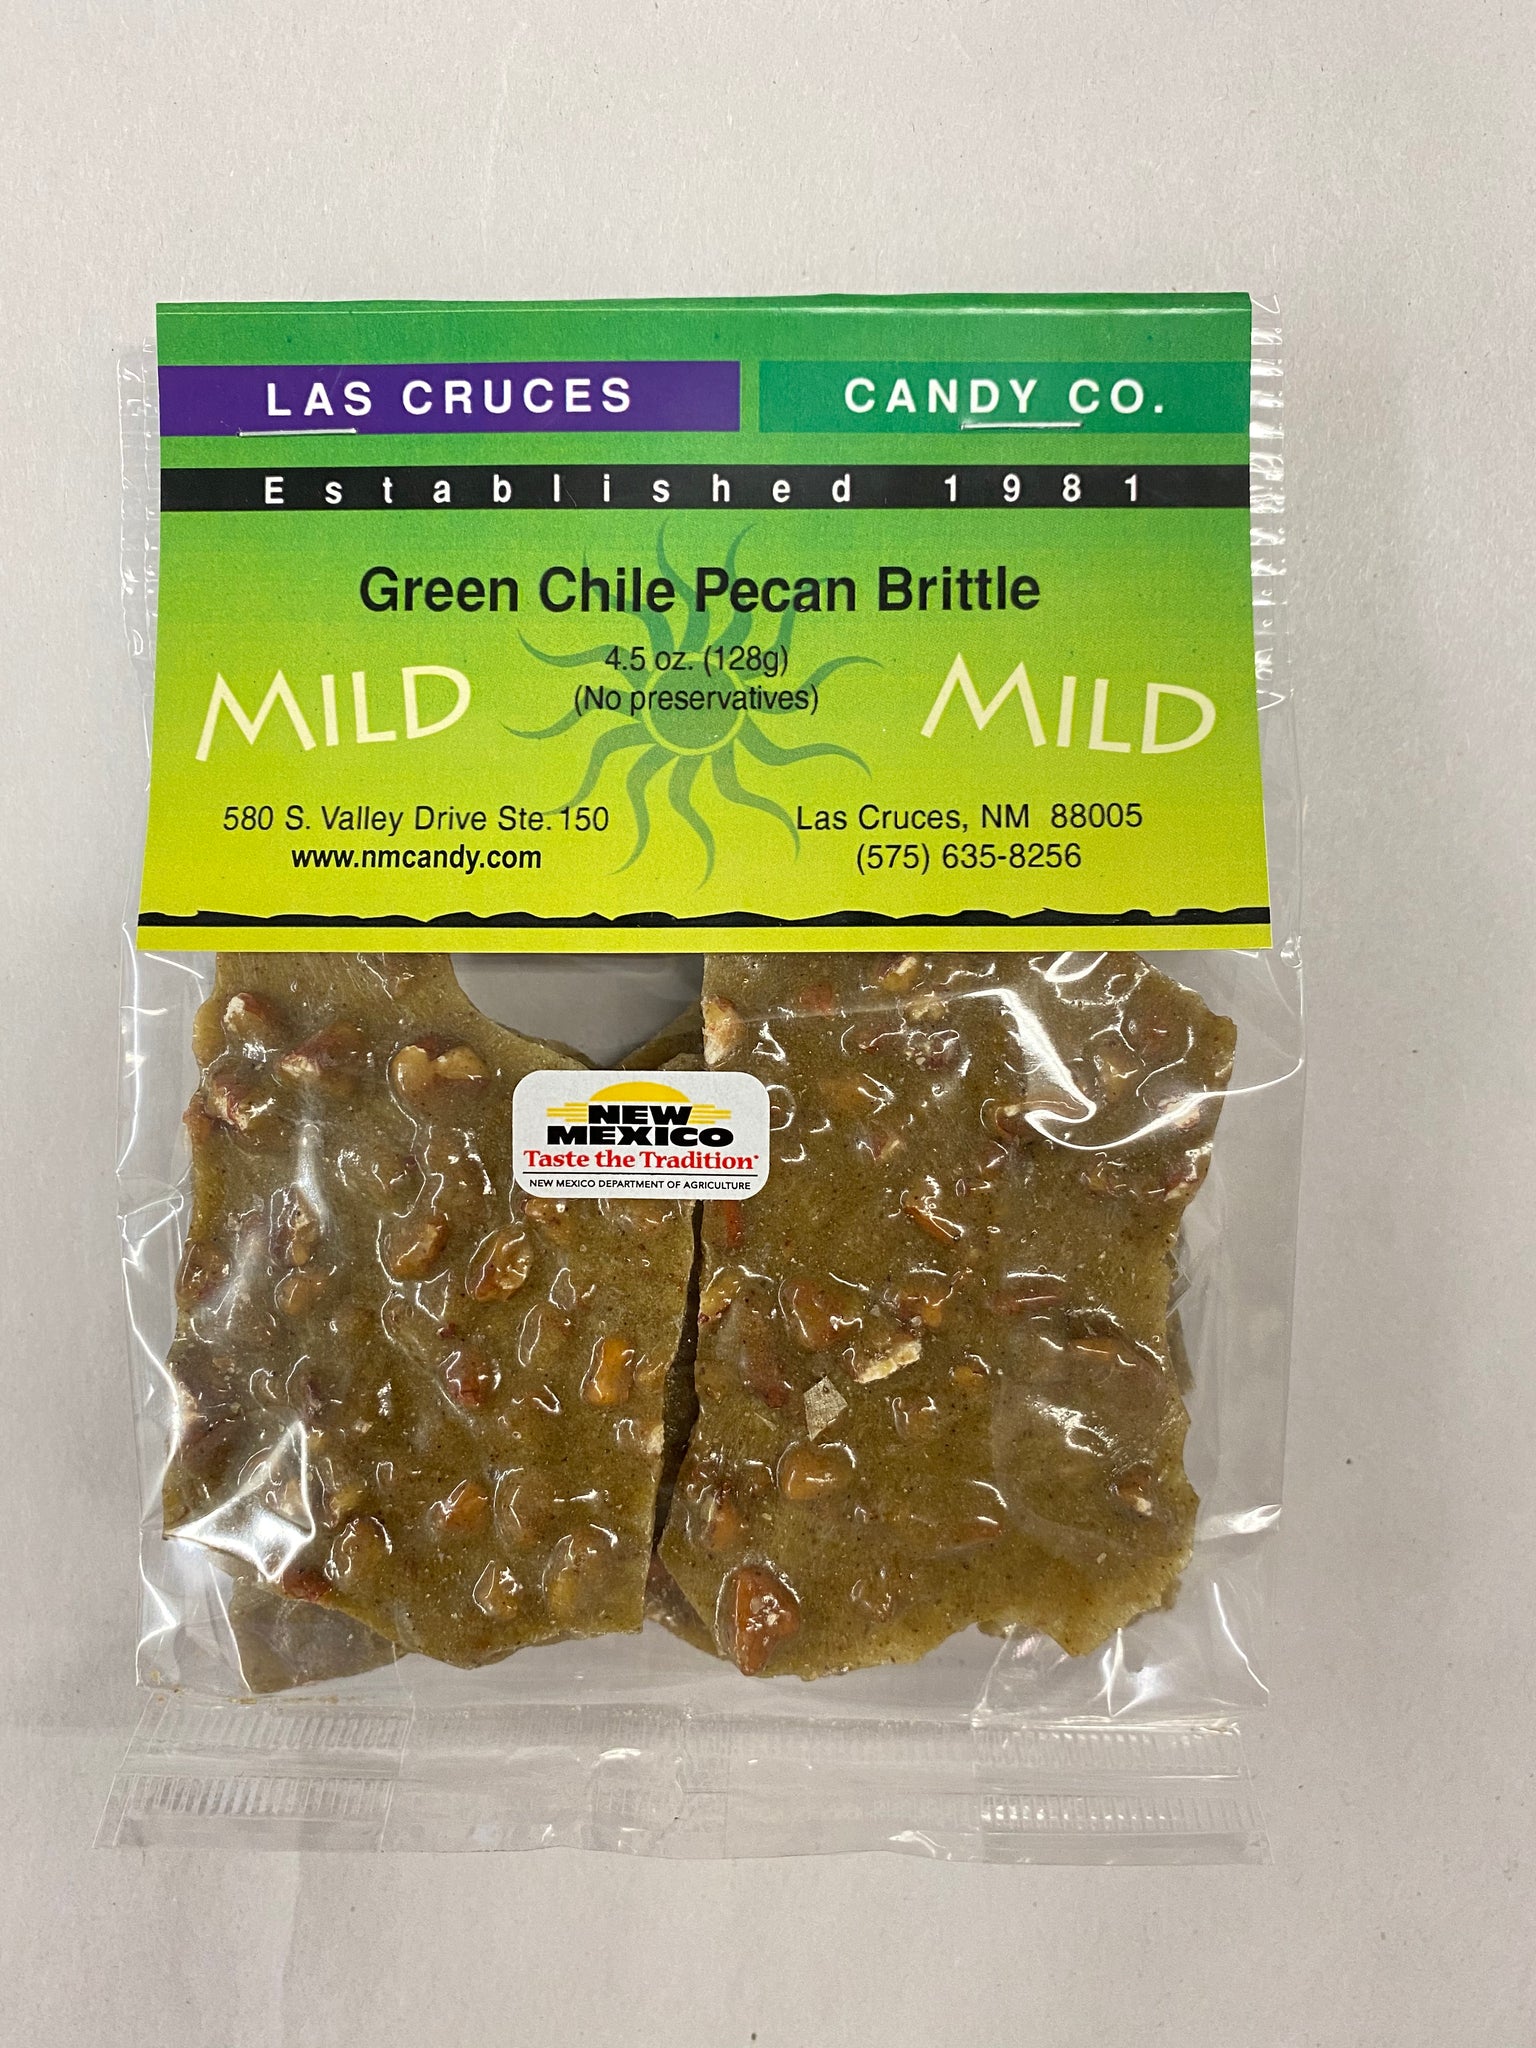 Green Chile Pecan Brittle